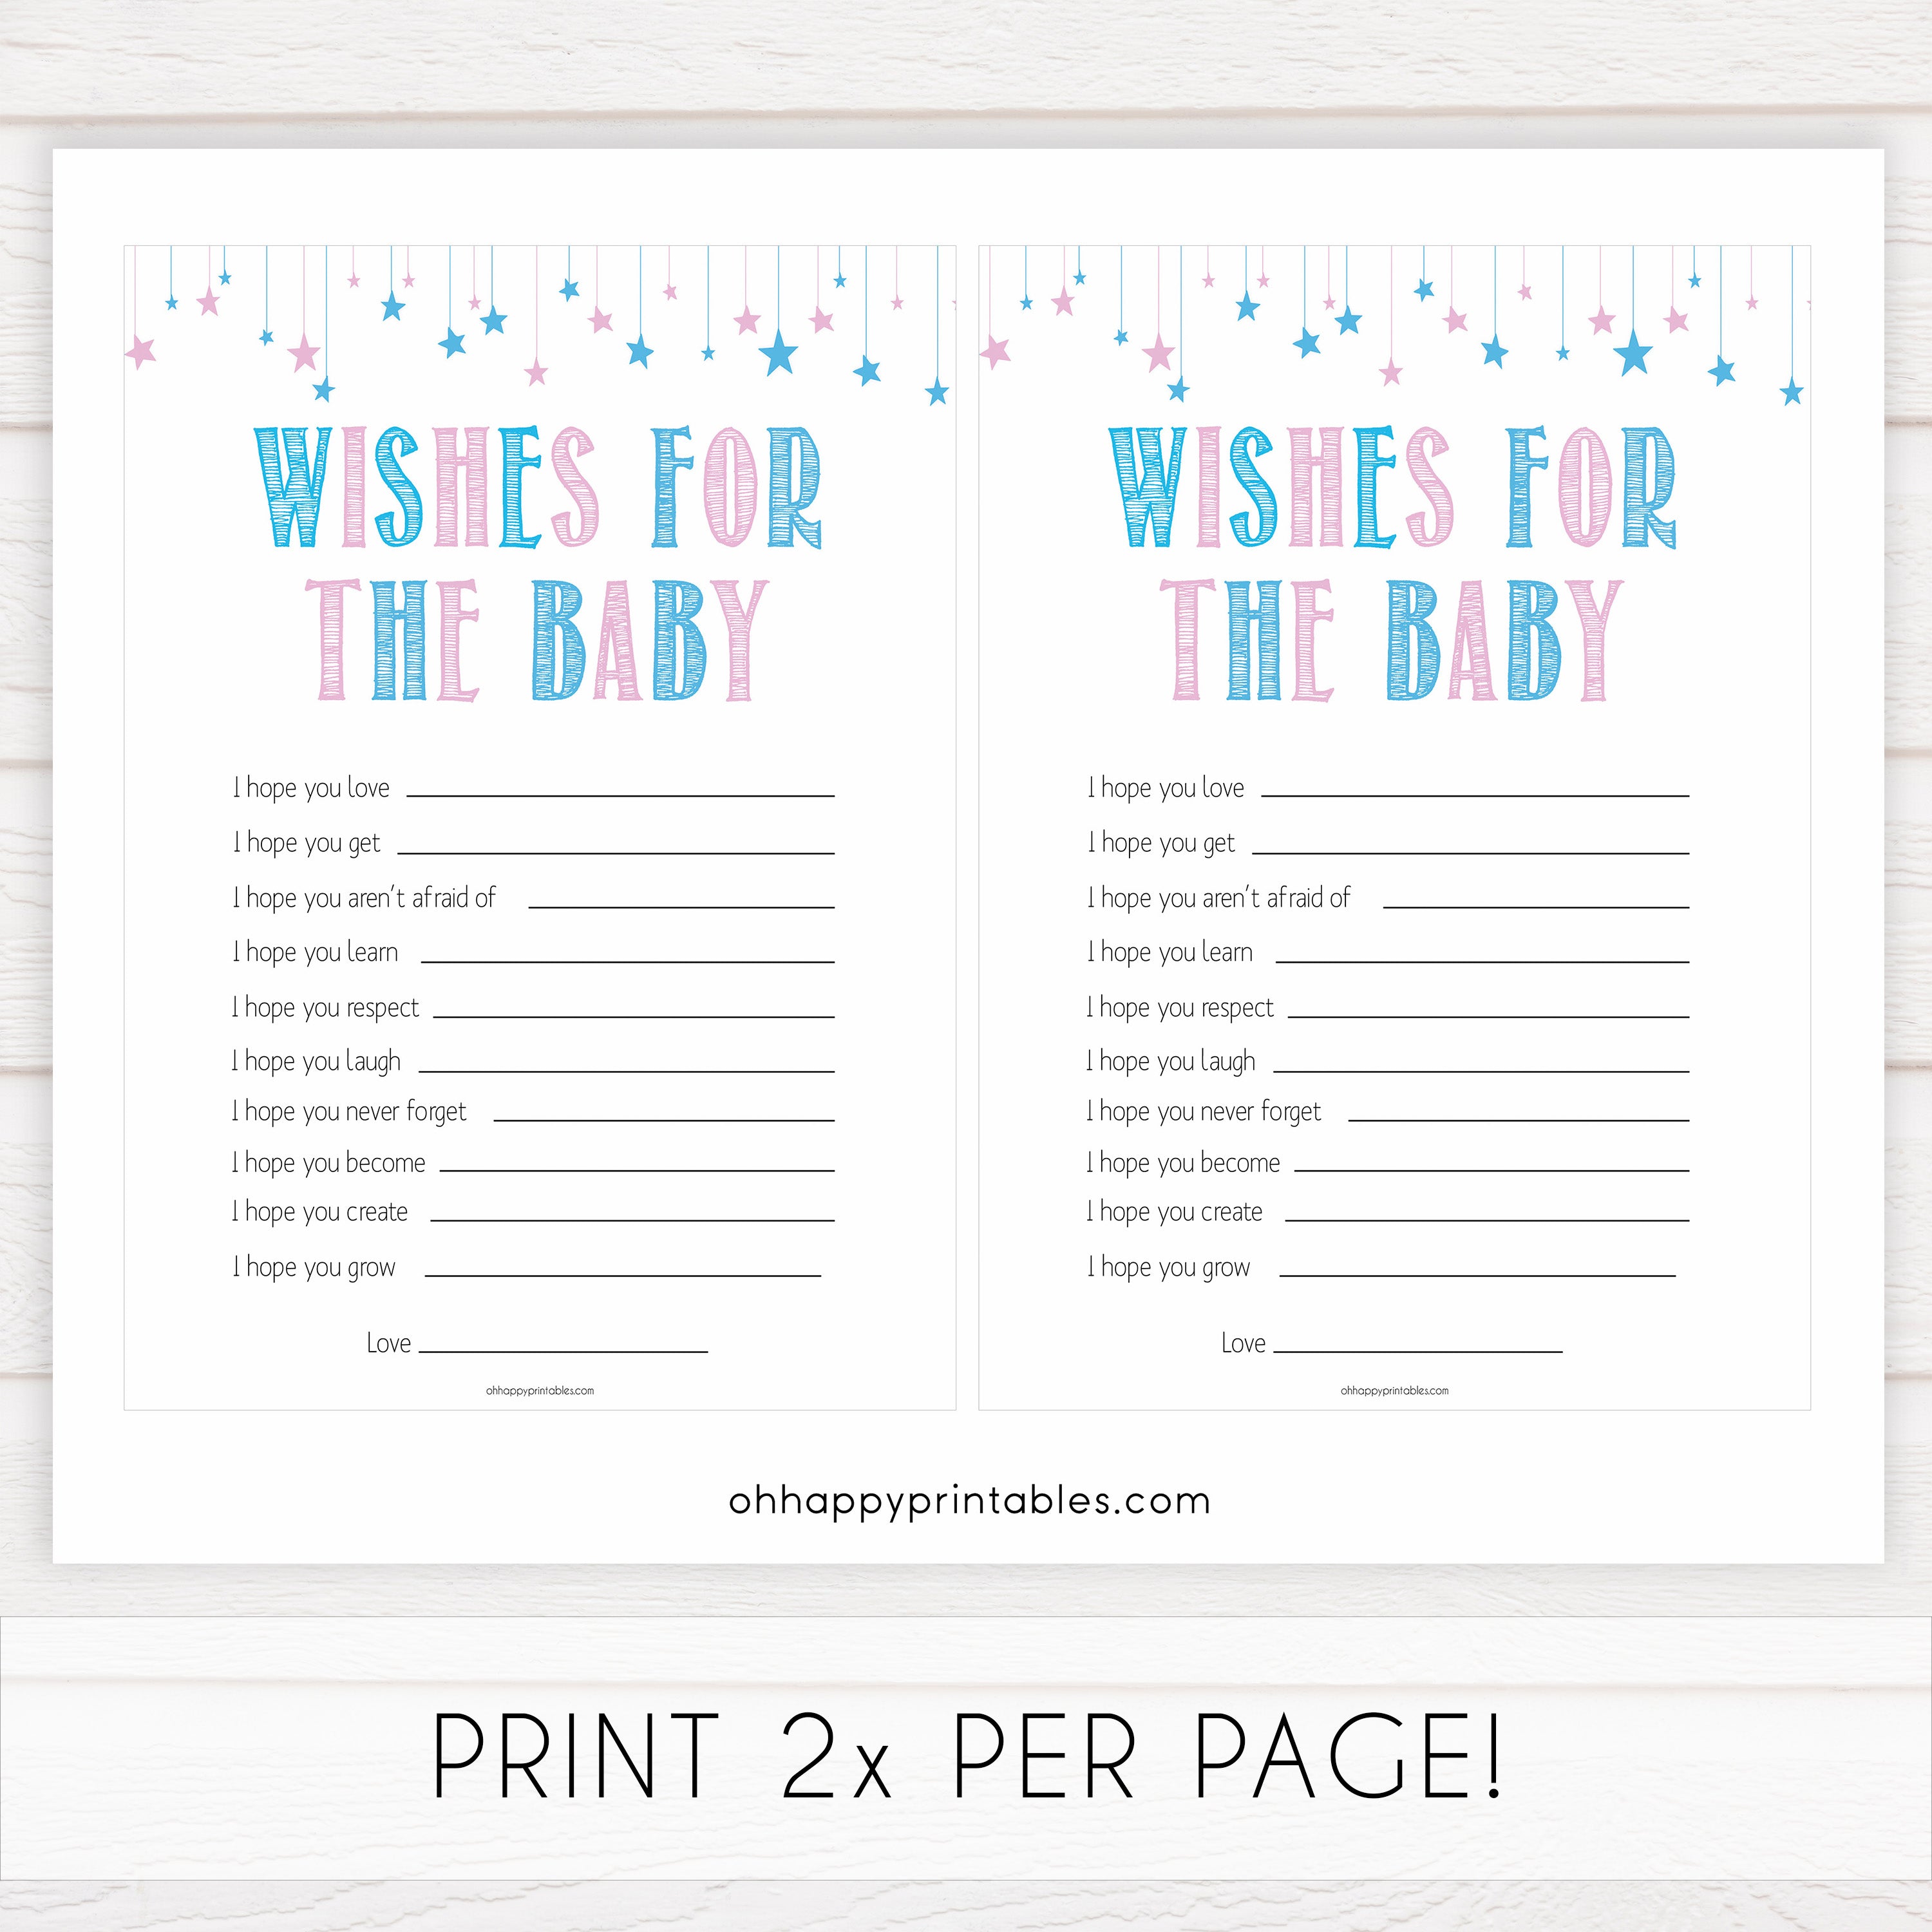 Gender reveal baby games, wishes for the baby baby game, gender reveal shower, fun baby games, gender reveal ideas, popular baby games, best baby games, printable baby games, gender reveal baby games